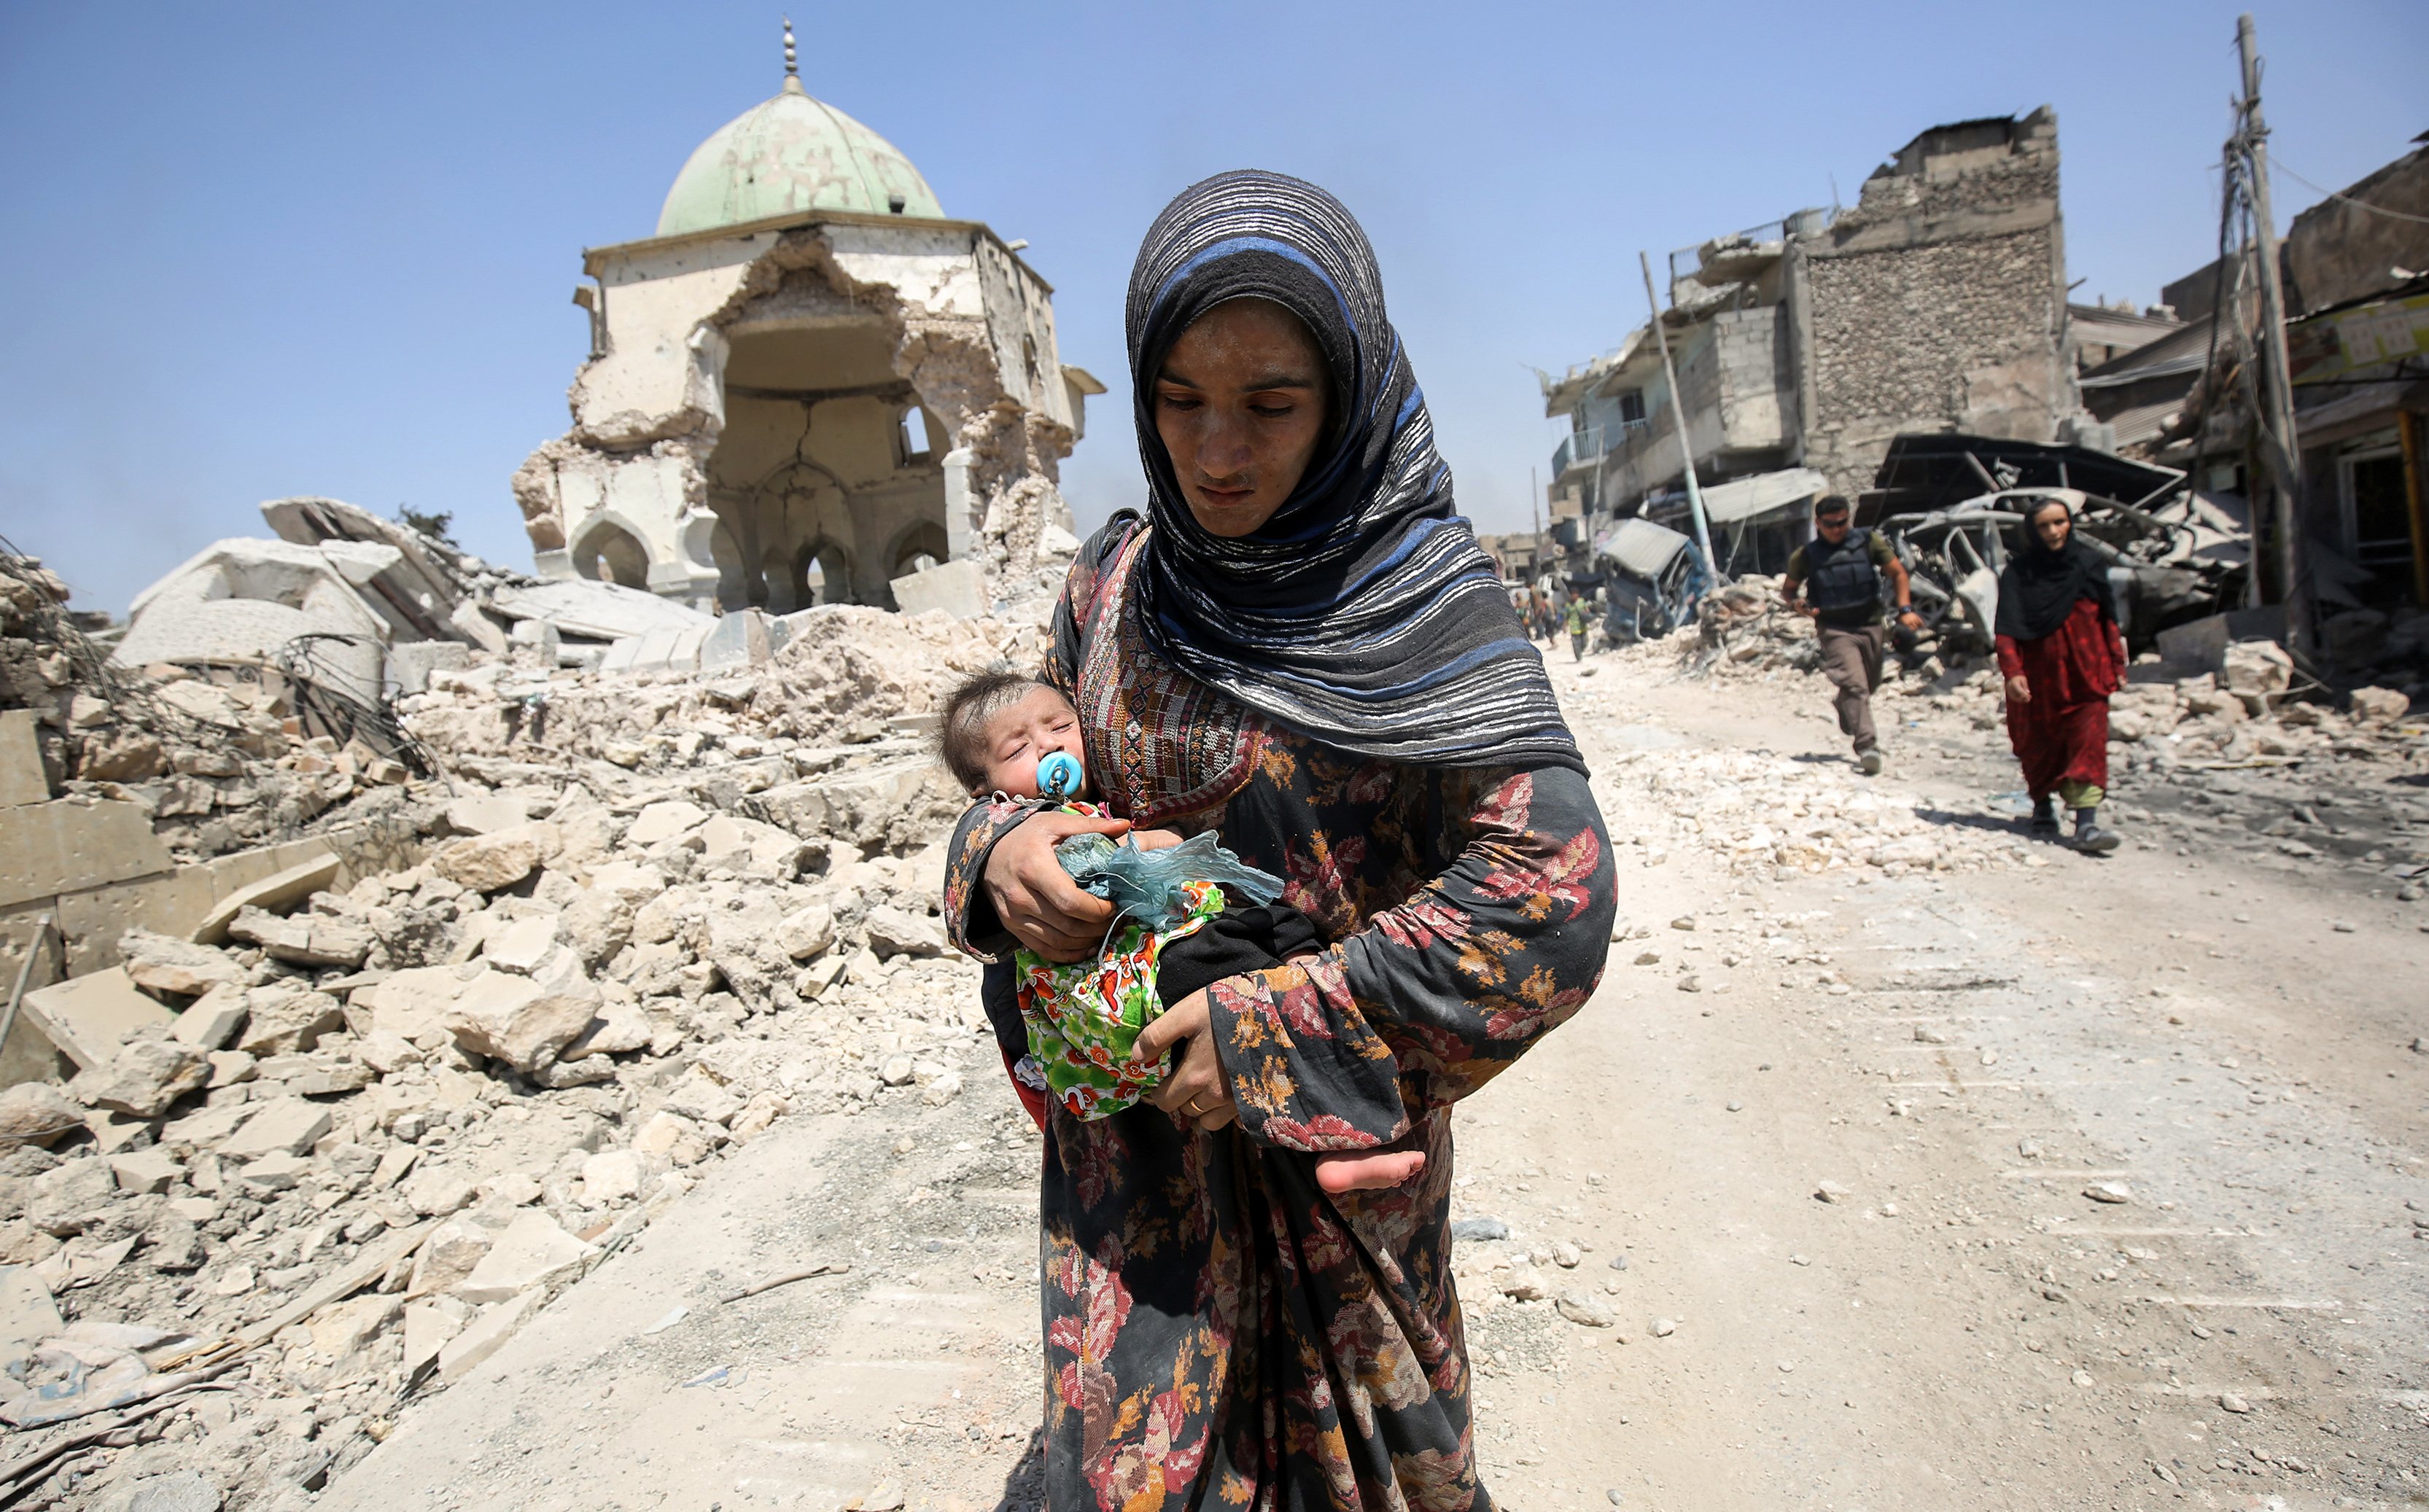 An Iraqi woman, carrying an infant, walks by the destroyed Al-Nuri Mosque as she flees from the Old City of Mosul on July 5, 2017, during the Iraqi government forces' offensive to retake the city from Islamic State (IS) group fighters..Iraqi forces have been closing in on the Old City in west Mosul for months, but the terrain combined with a la